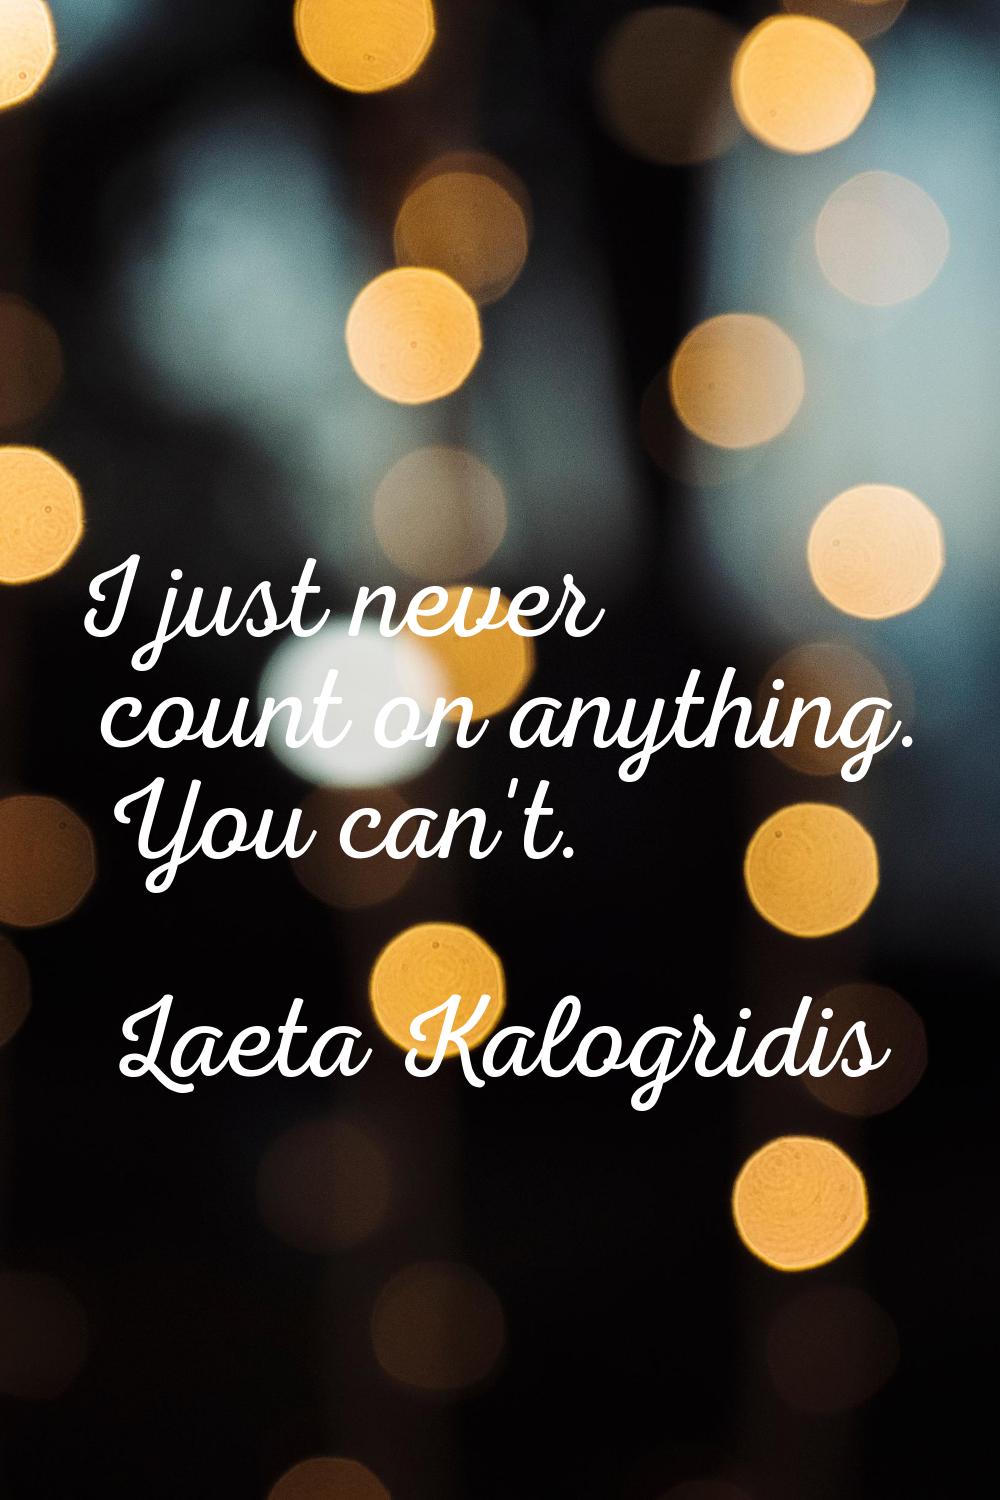 I just never count on anything. You can't.